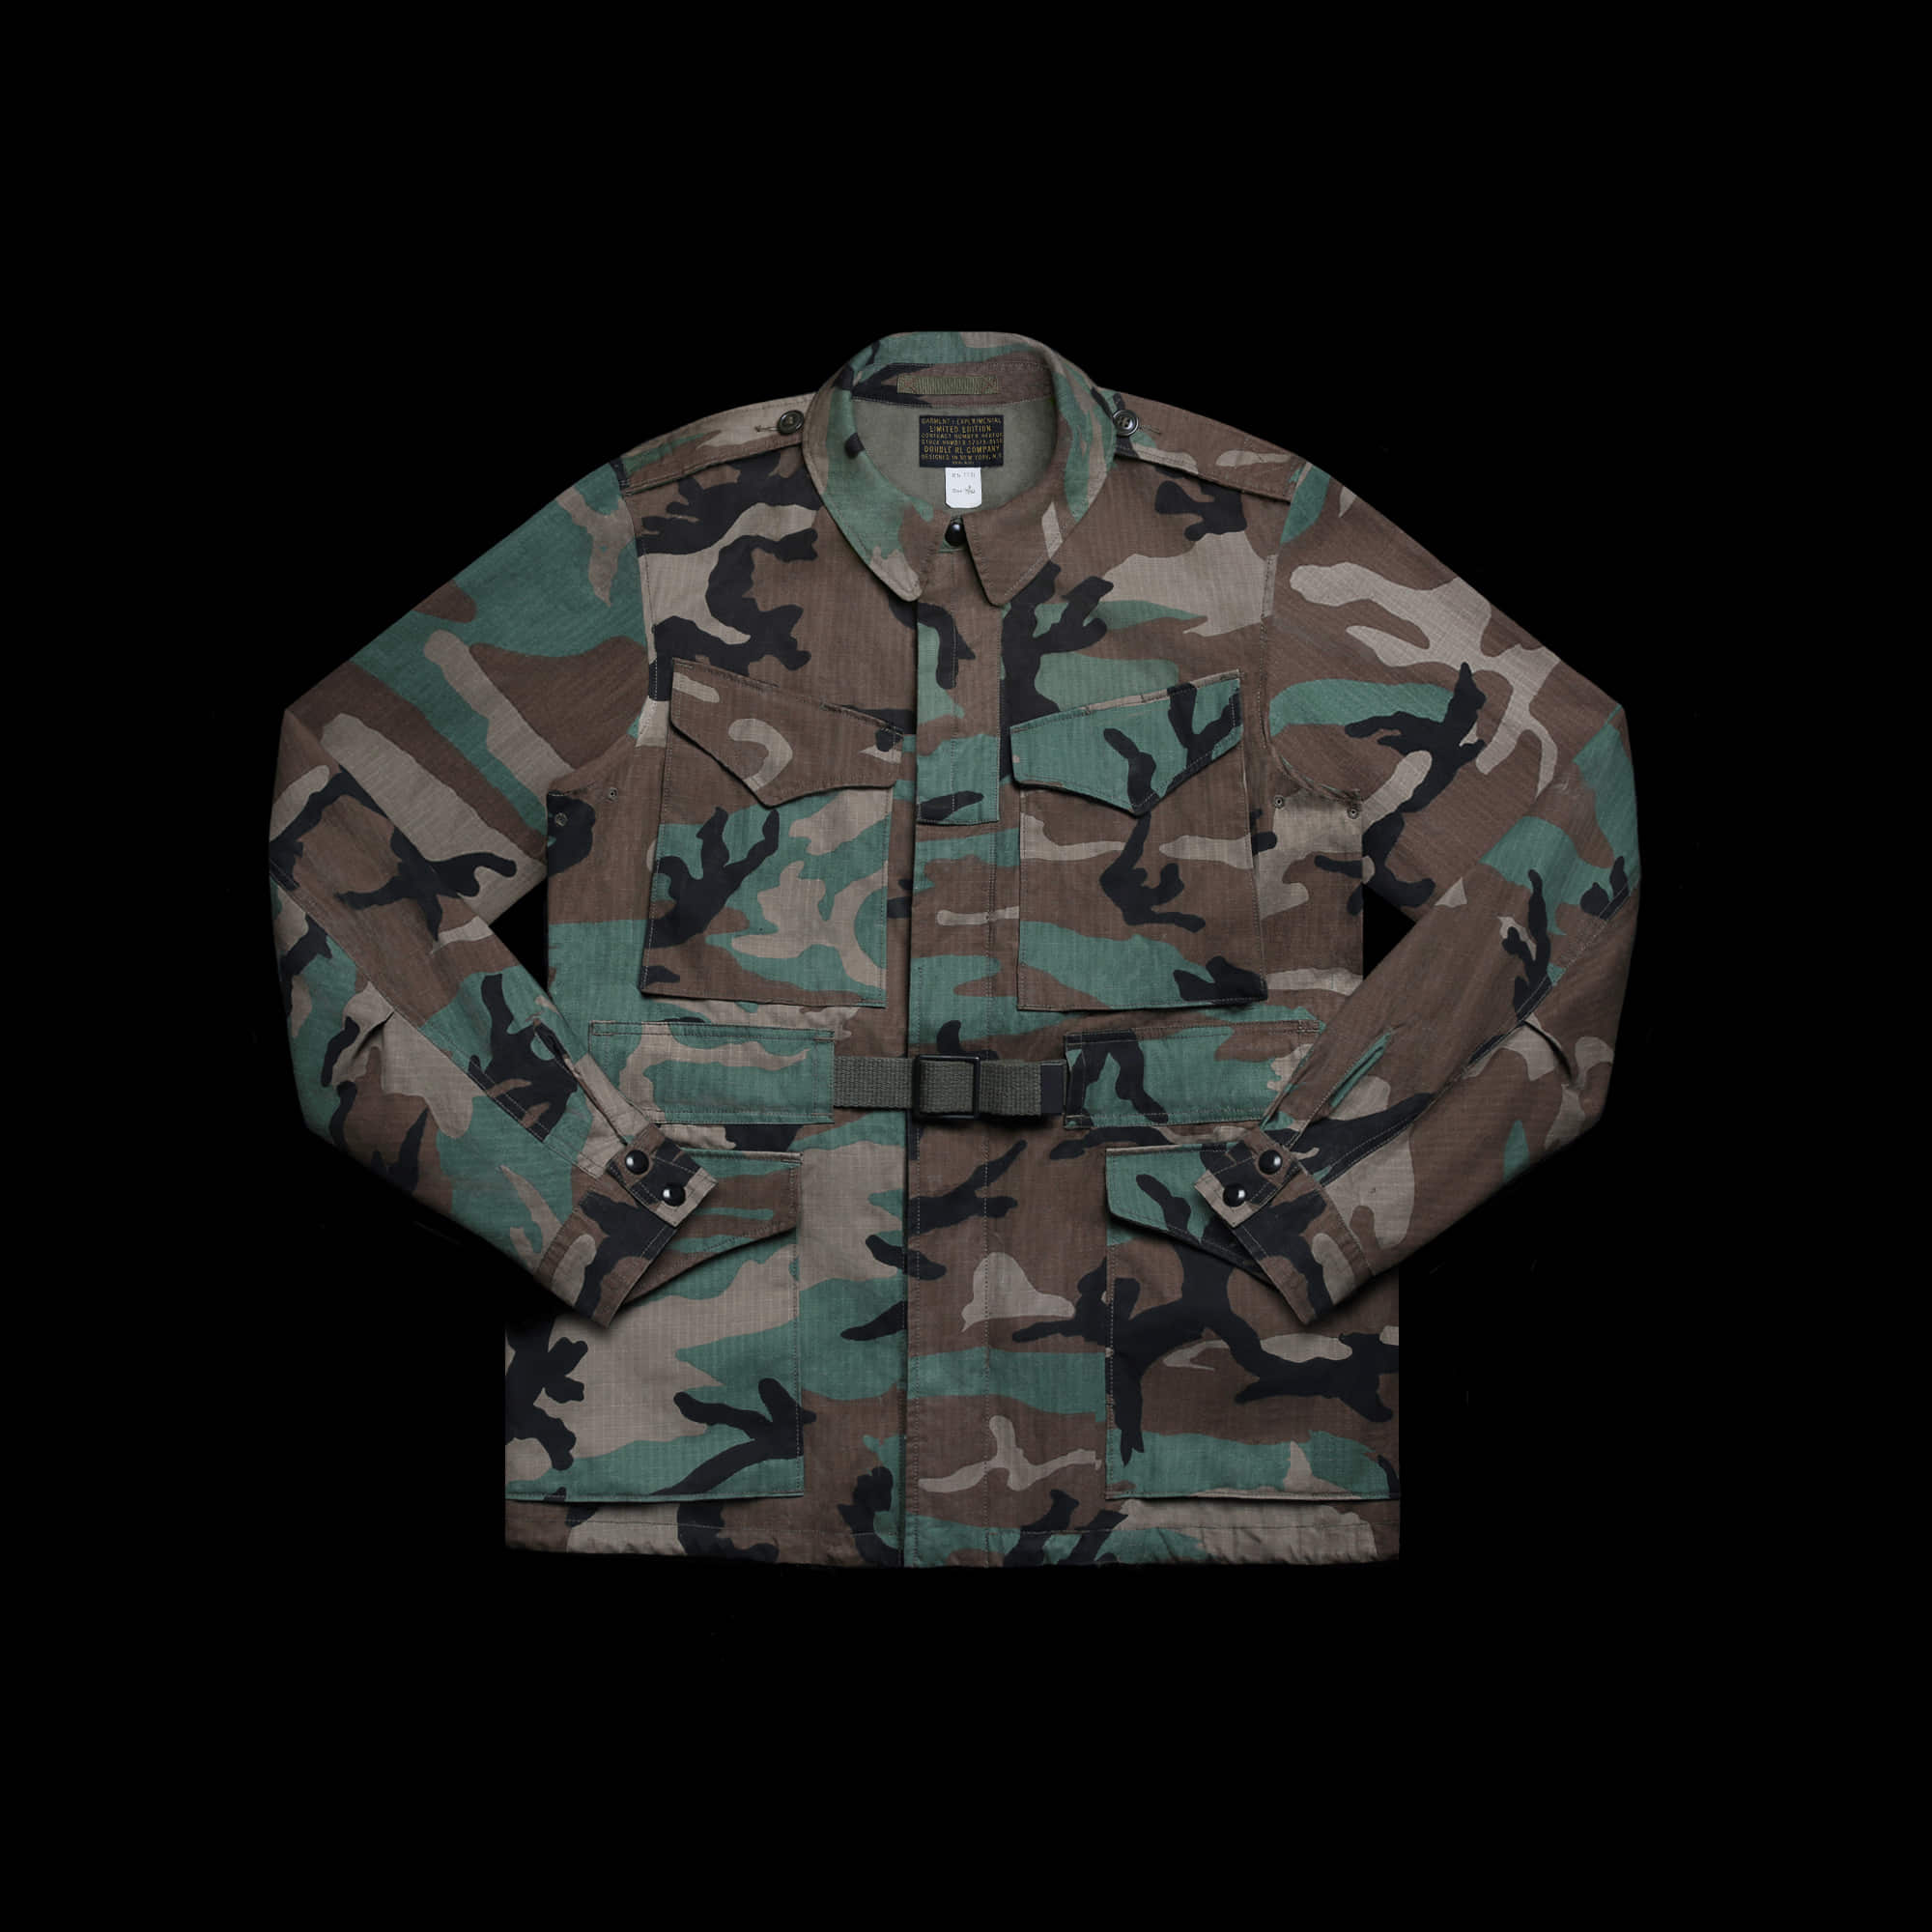 RRLLIMITED EDITIONCAMO PARATROOPERFIELD JACKET